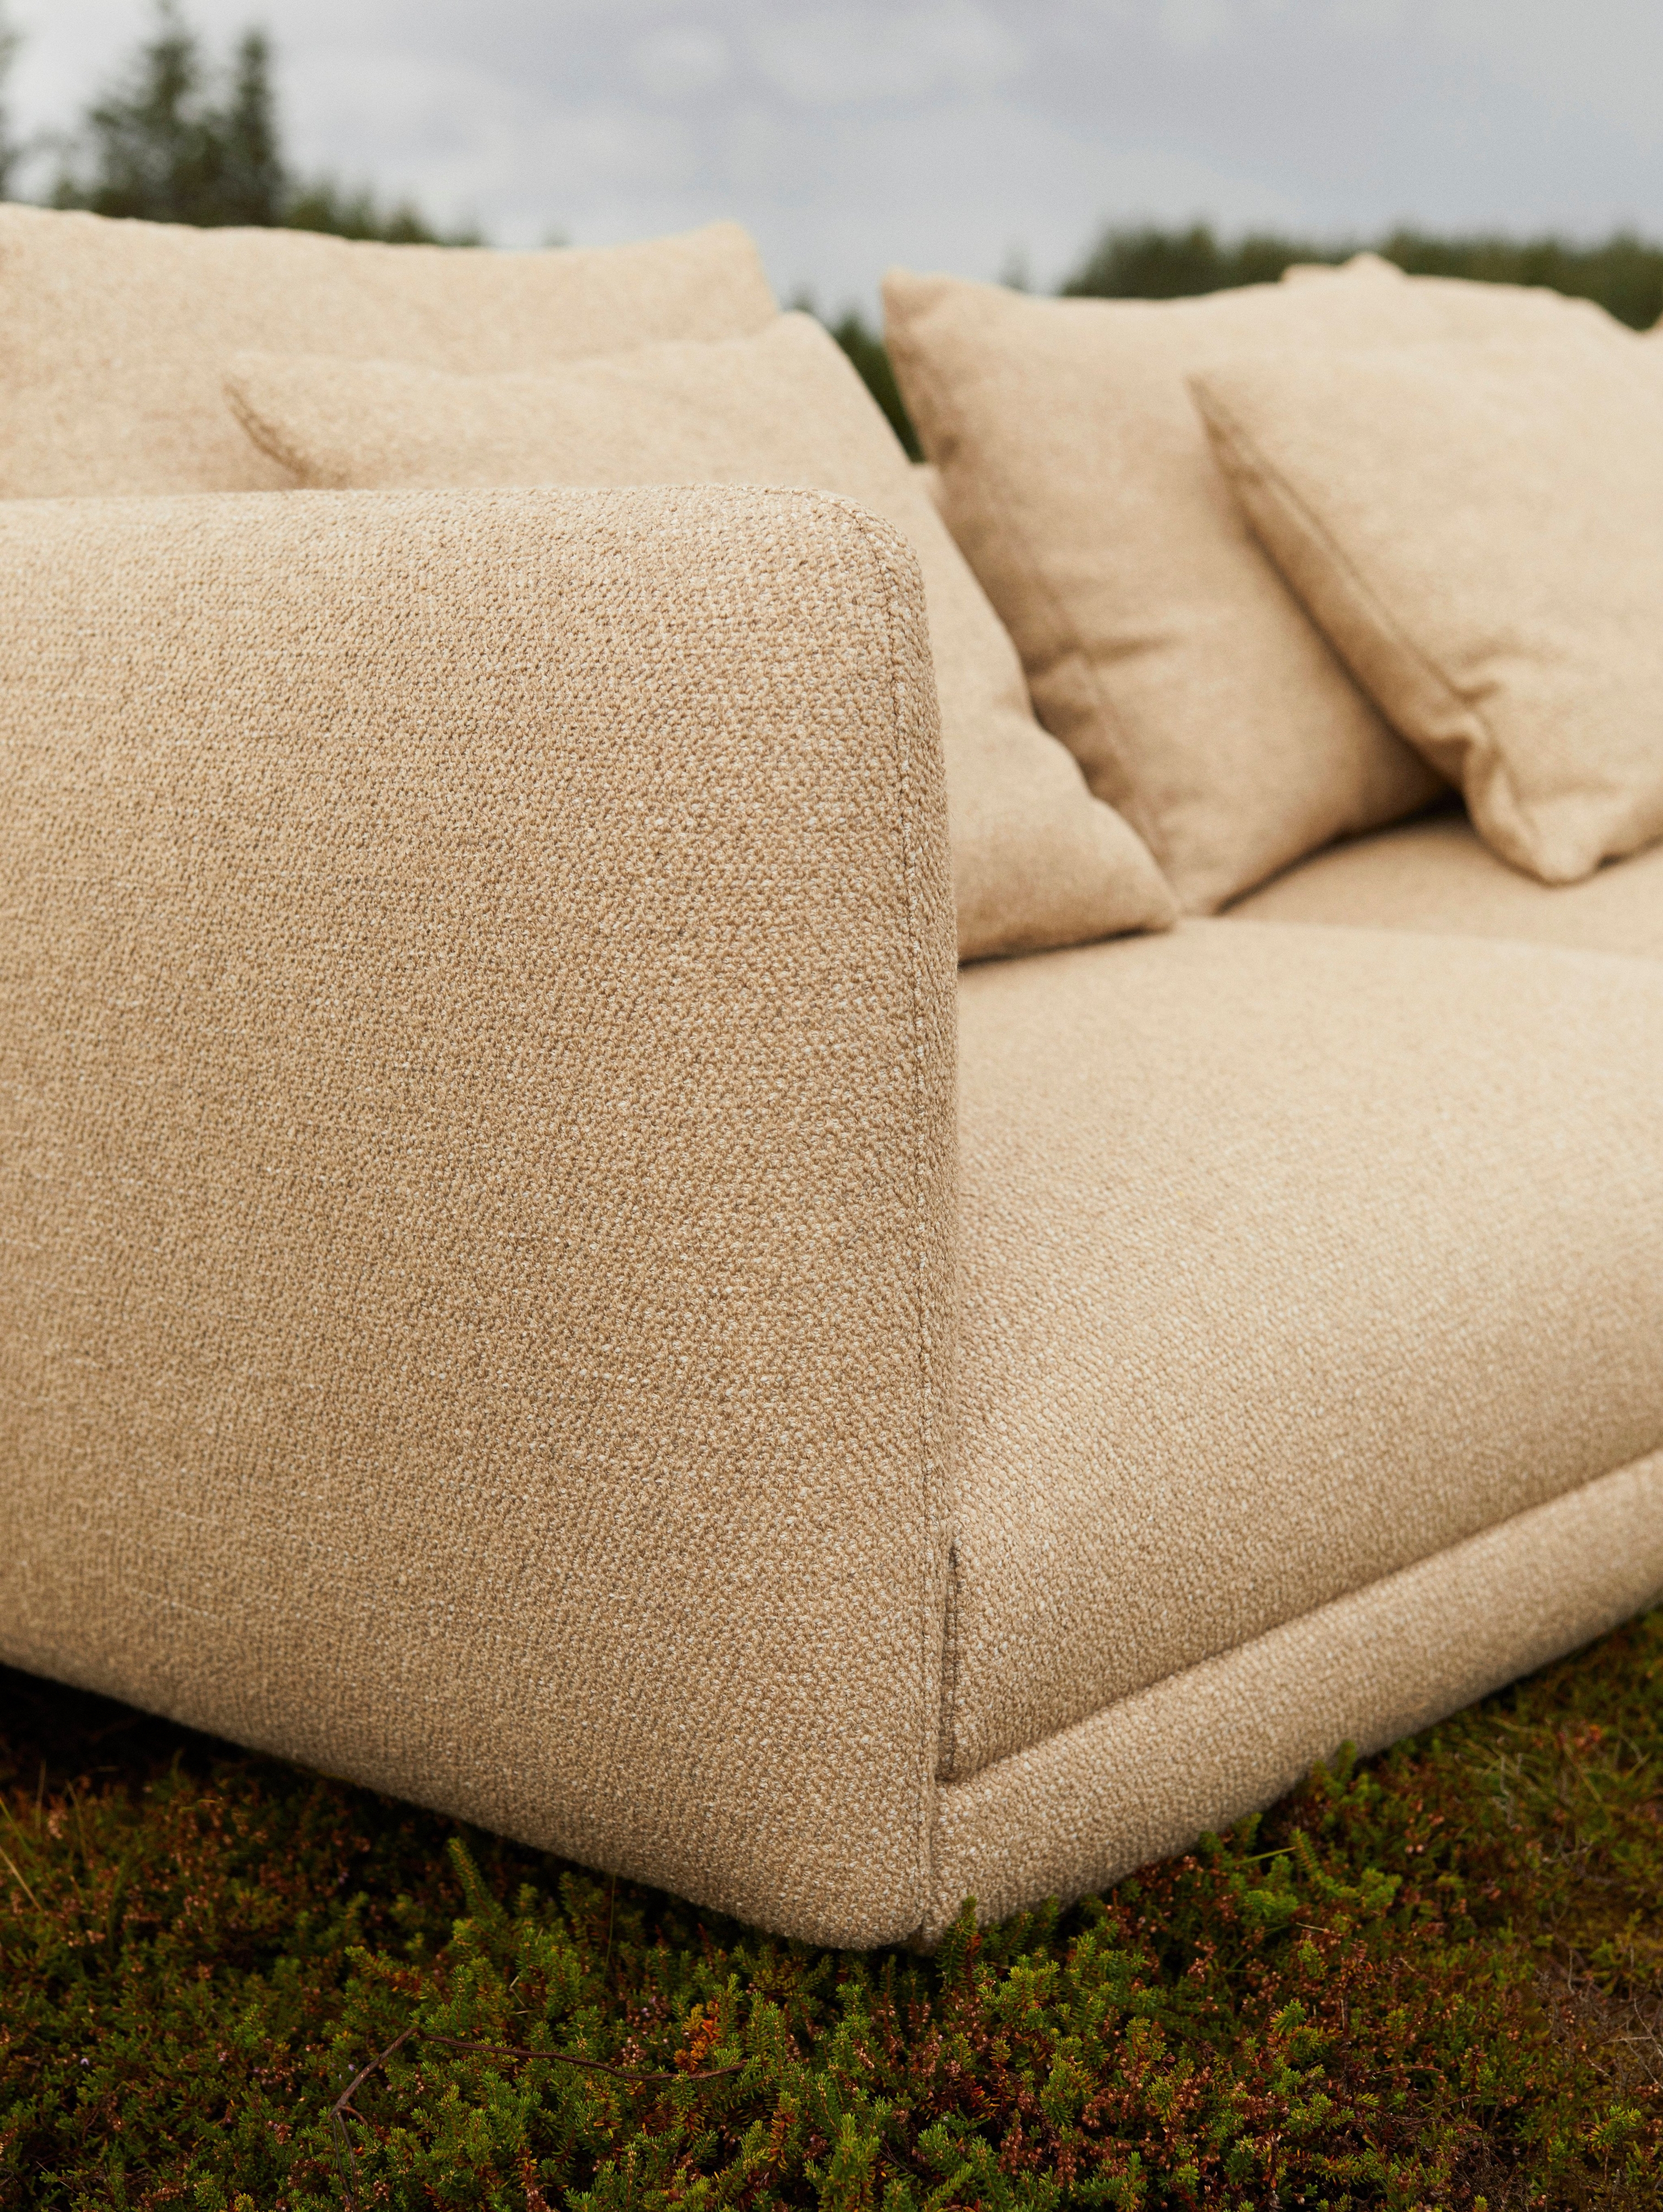 A sun-drenched outdoors featuring the Salamanca sofa.